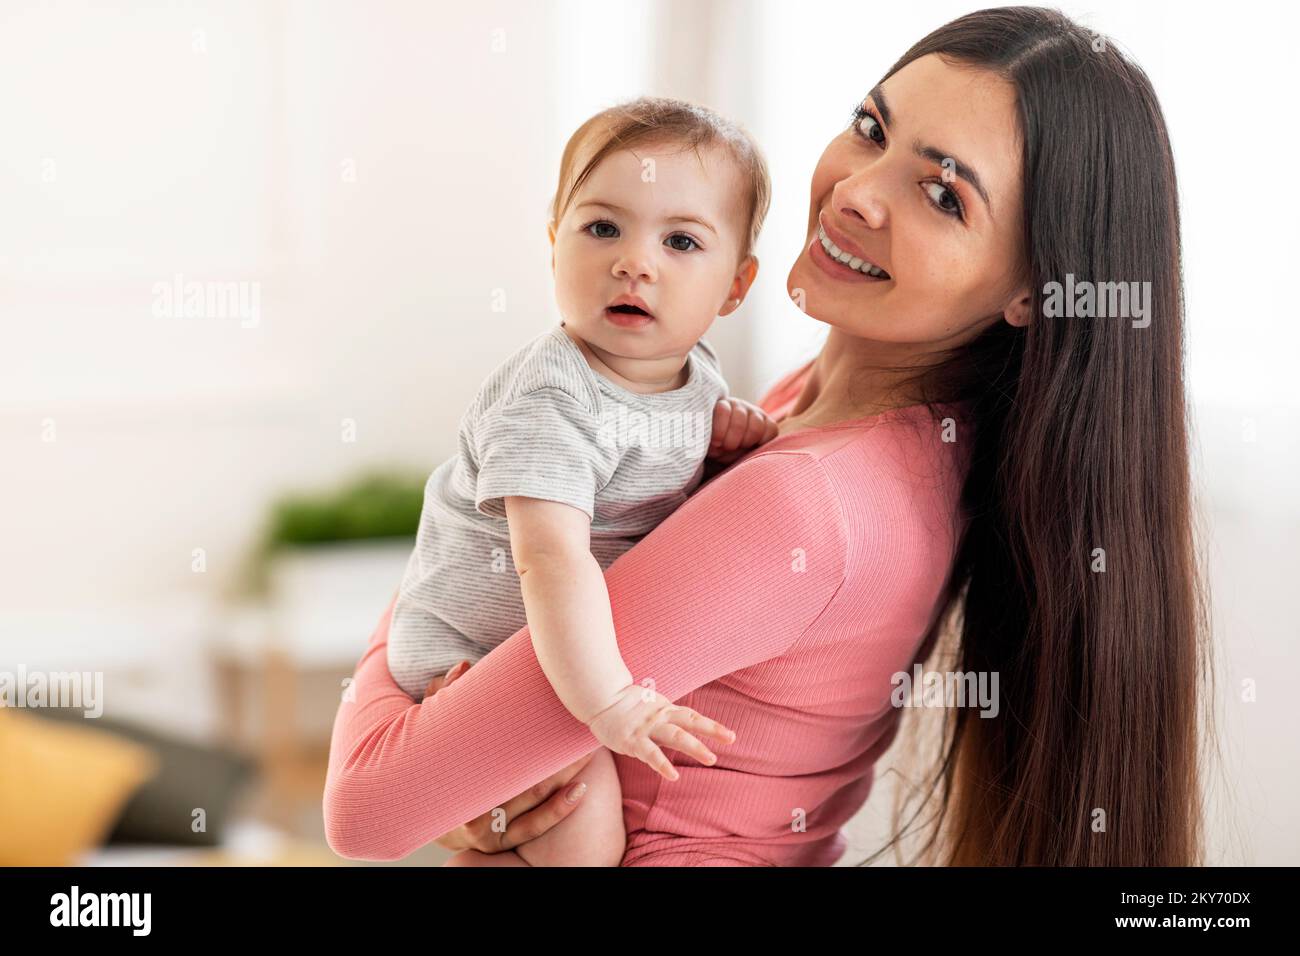 Happiness of motherhood. Portrait of happy mother with cute little baby on her hands looking at camera, copy space Stock Photo